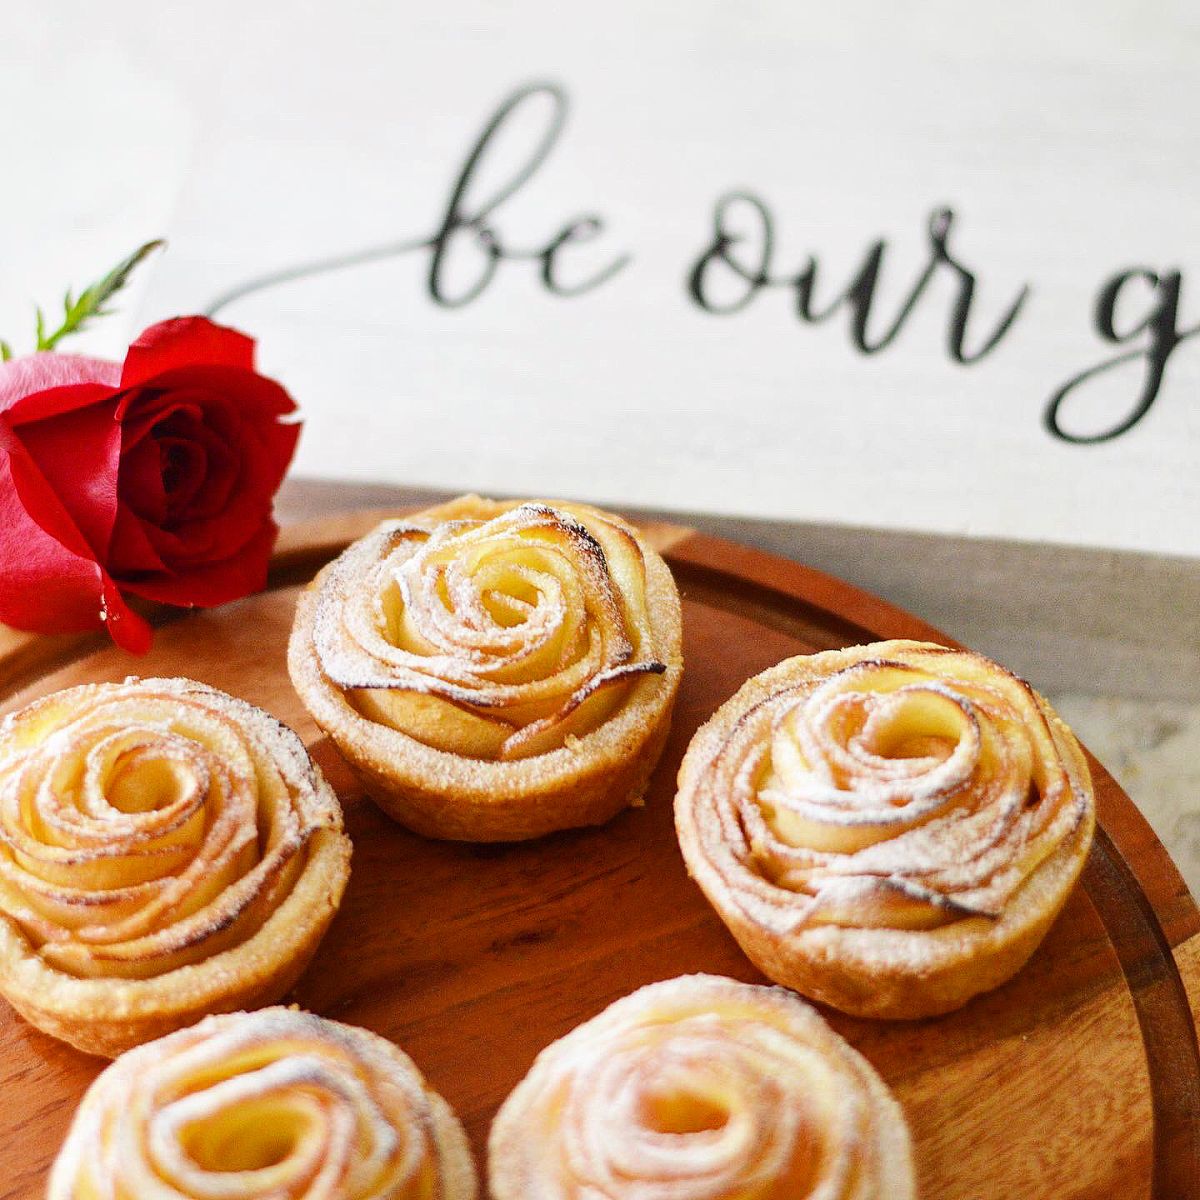 These apple rose tarts are the perfect treat for your Beauty and the Beast party.  Simple yet elegant and so delicious.  